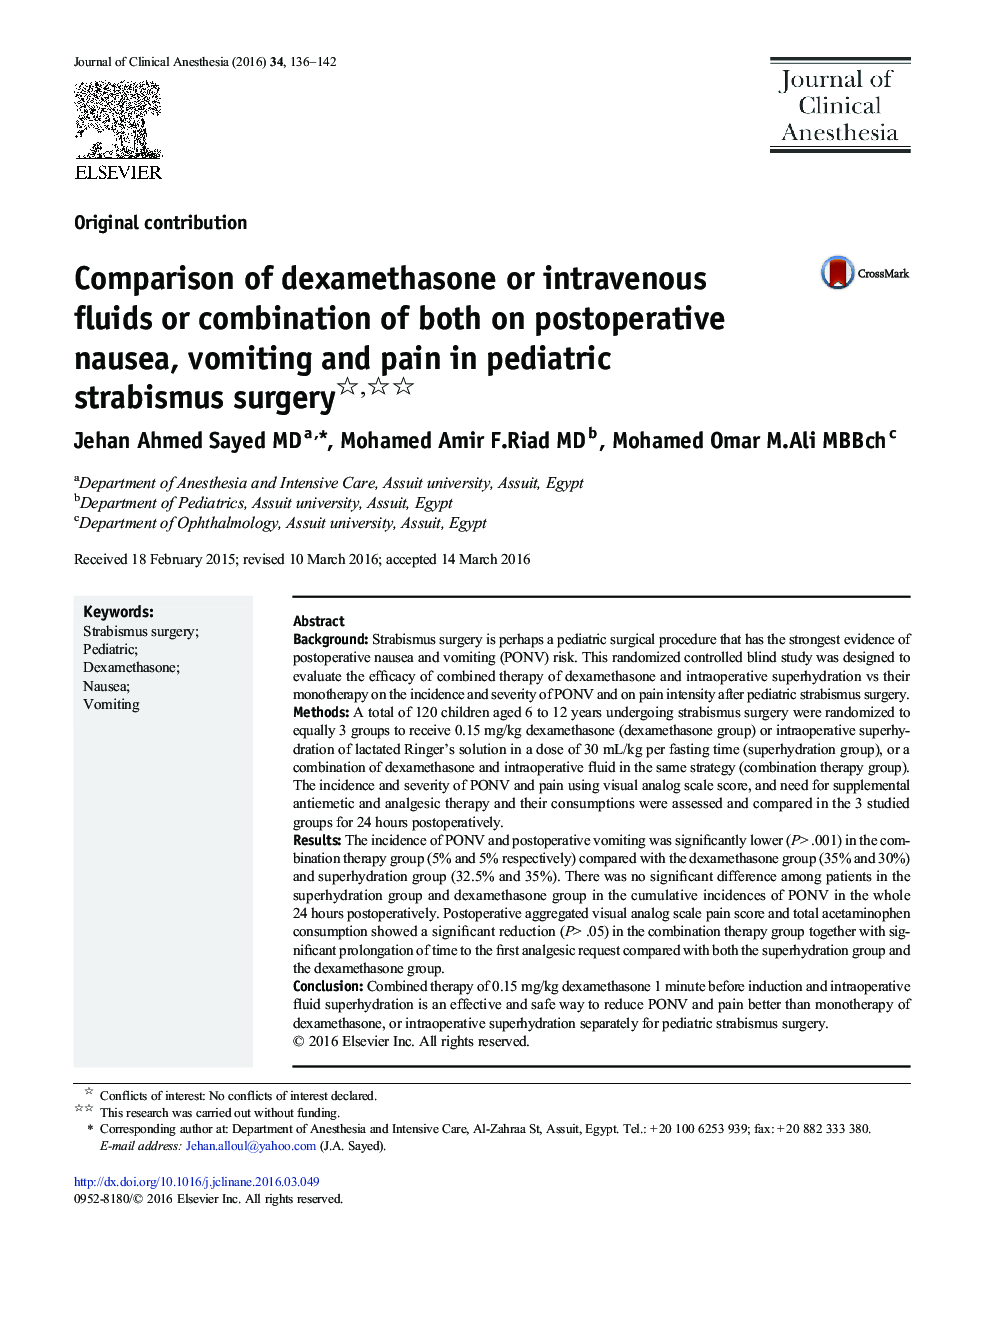 Comparison of dexamethasone or intravenous fluids or combination of both on postoperative nausea, vomiting and pain in pediatric strabismus surgery